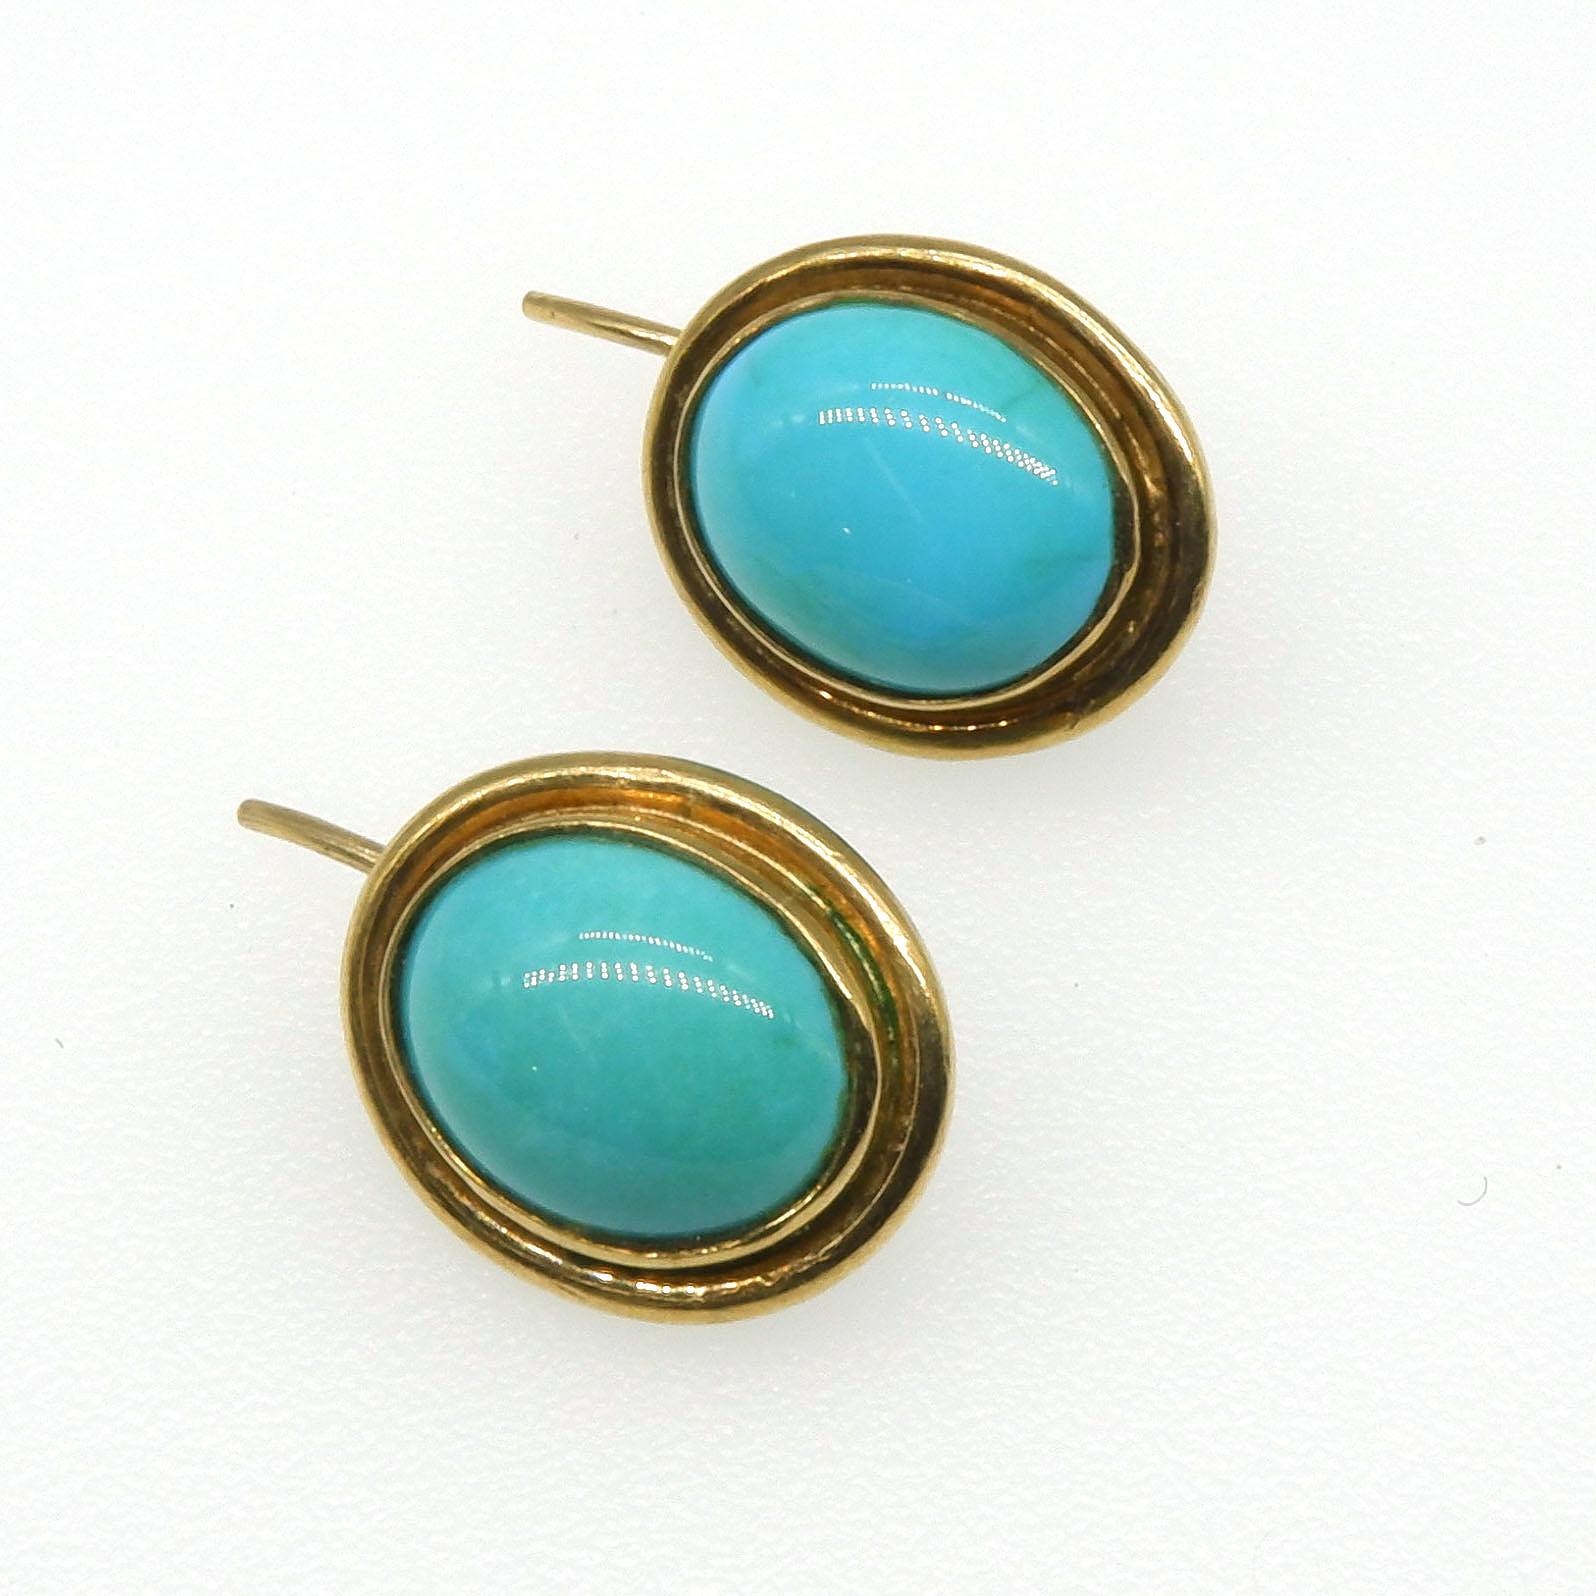 '9ct Yellow Gold Earrings with Oval Turquoise Cabochon'